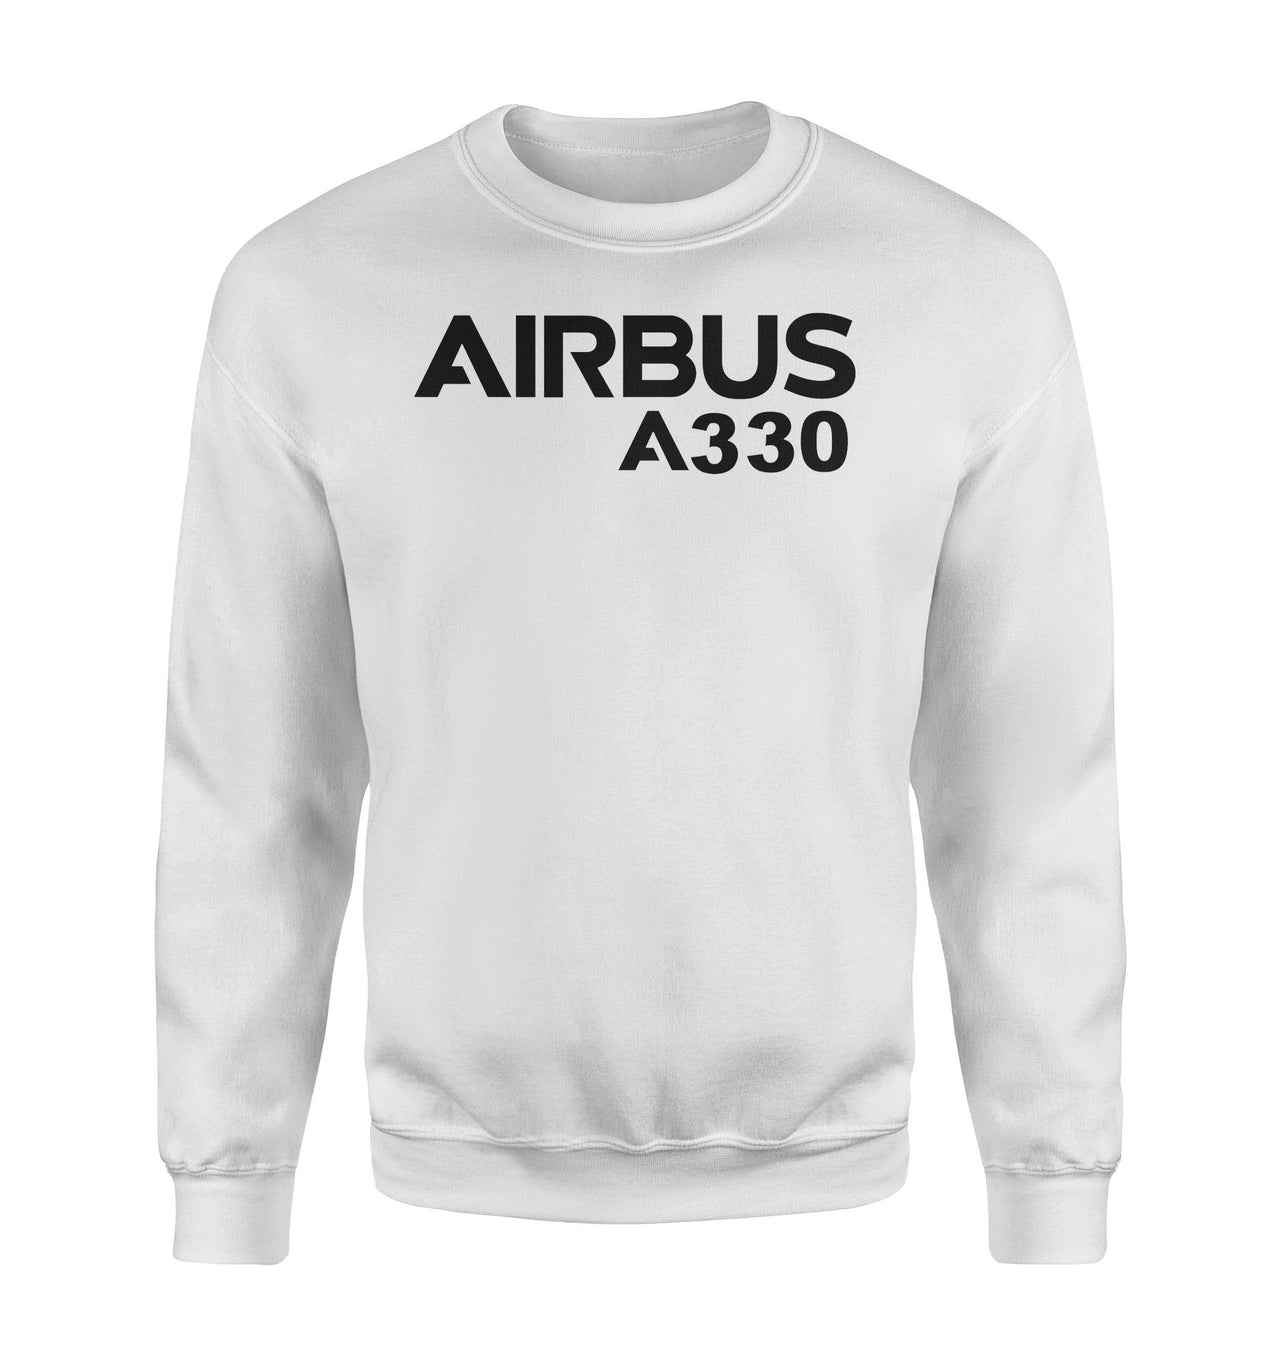 Airbus A330 & Text Designed Sweatshirts